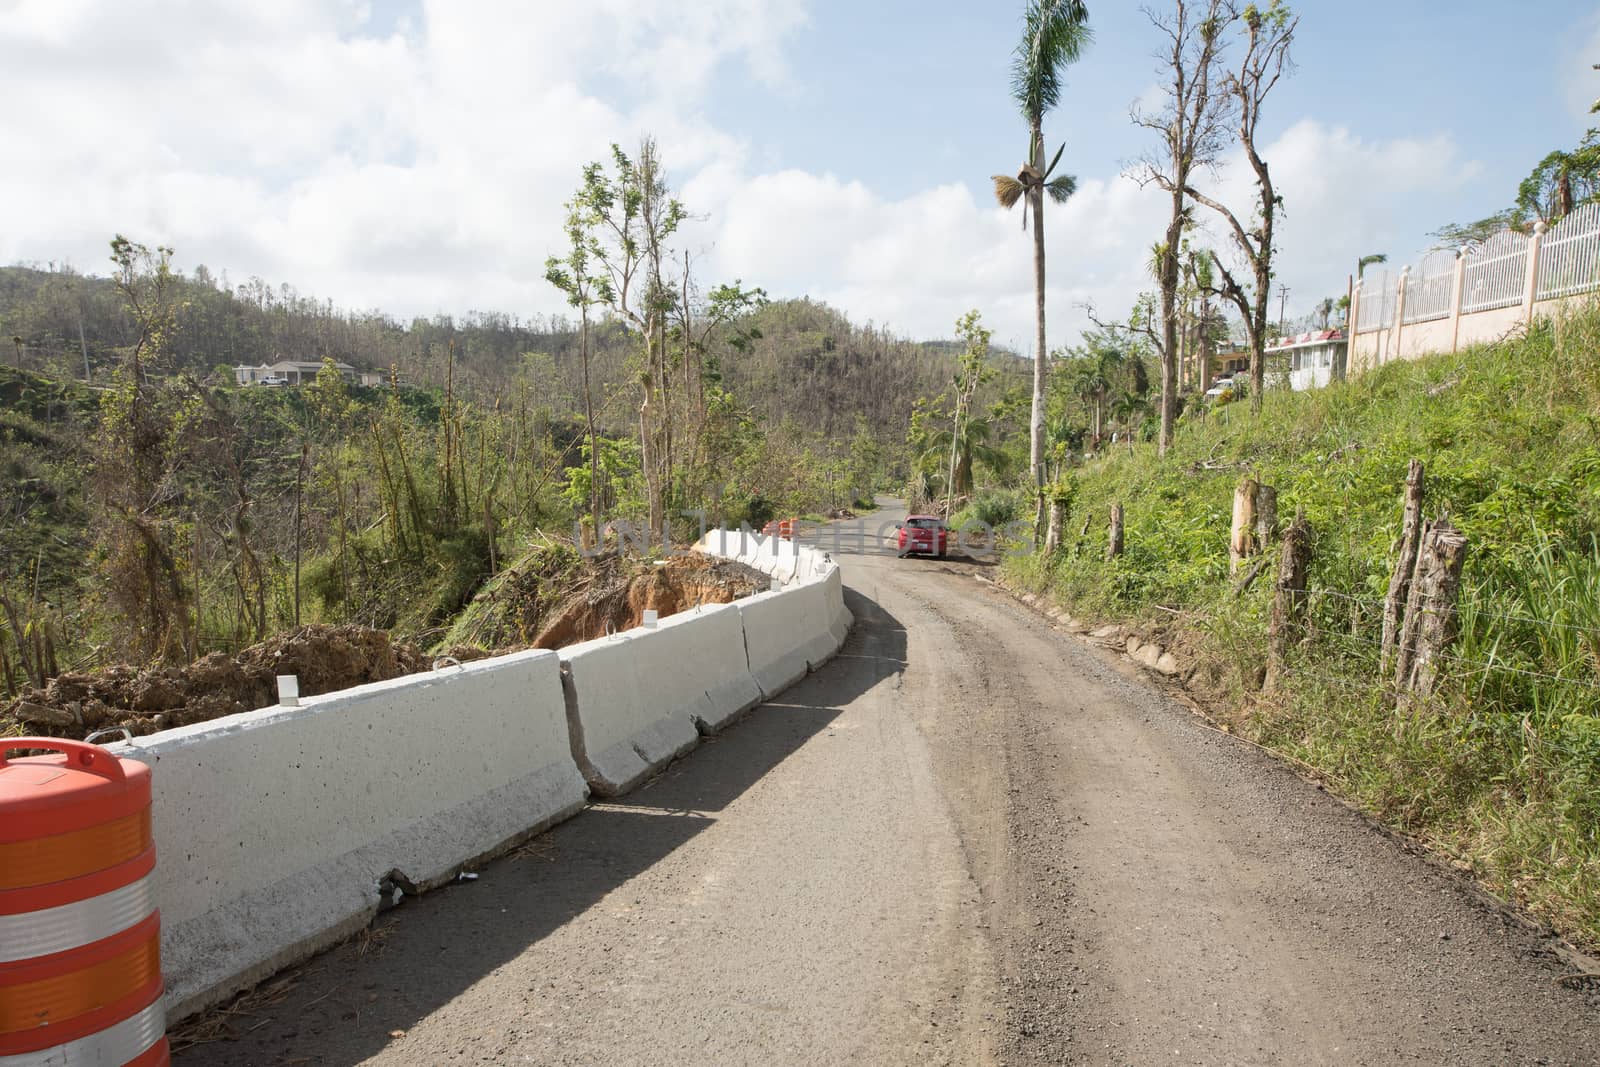 Road damage from Hurricane Maria, Sep 2017 by cestes001